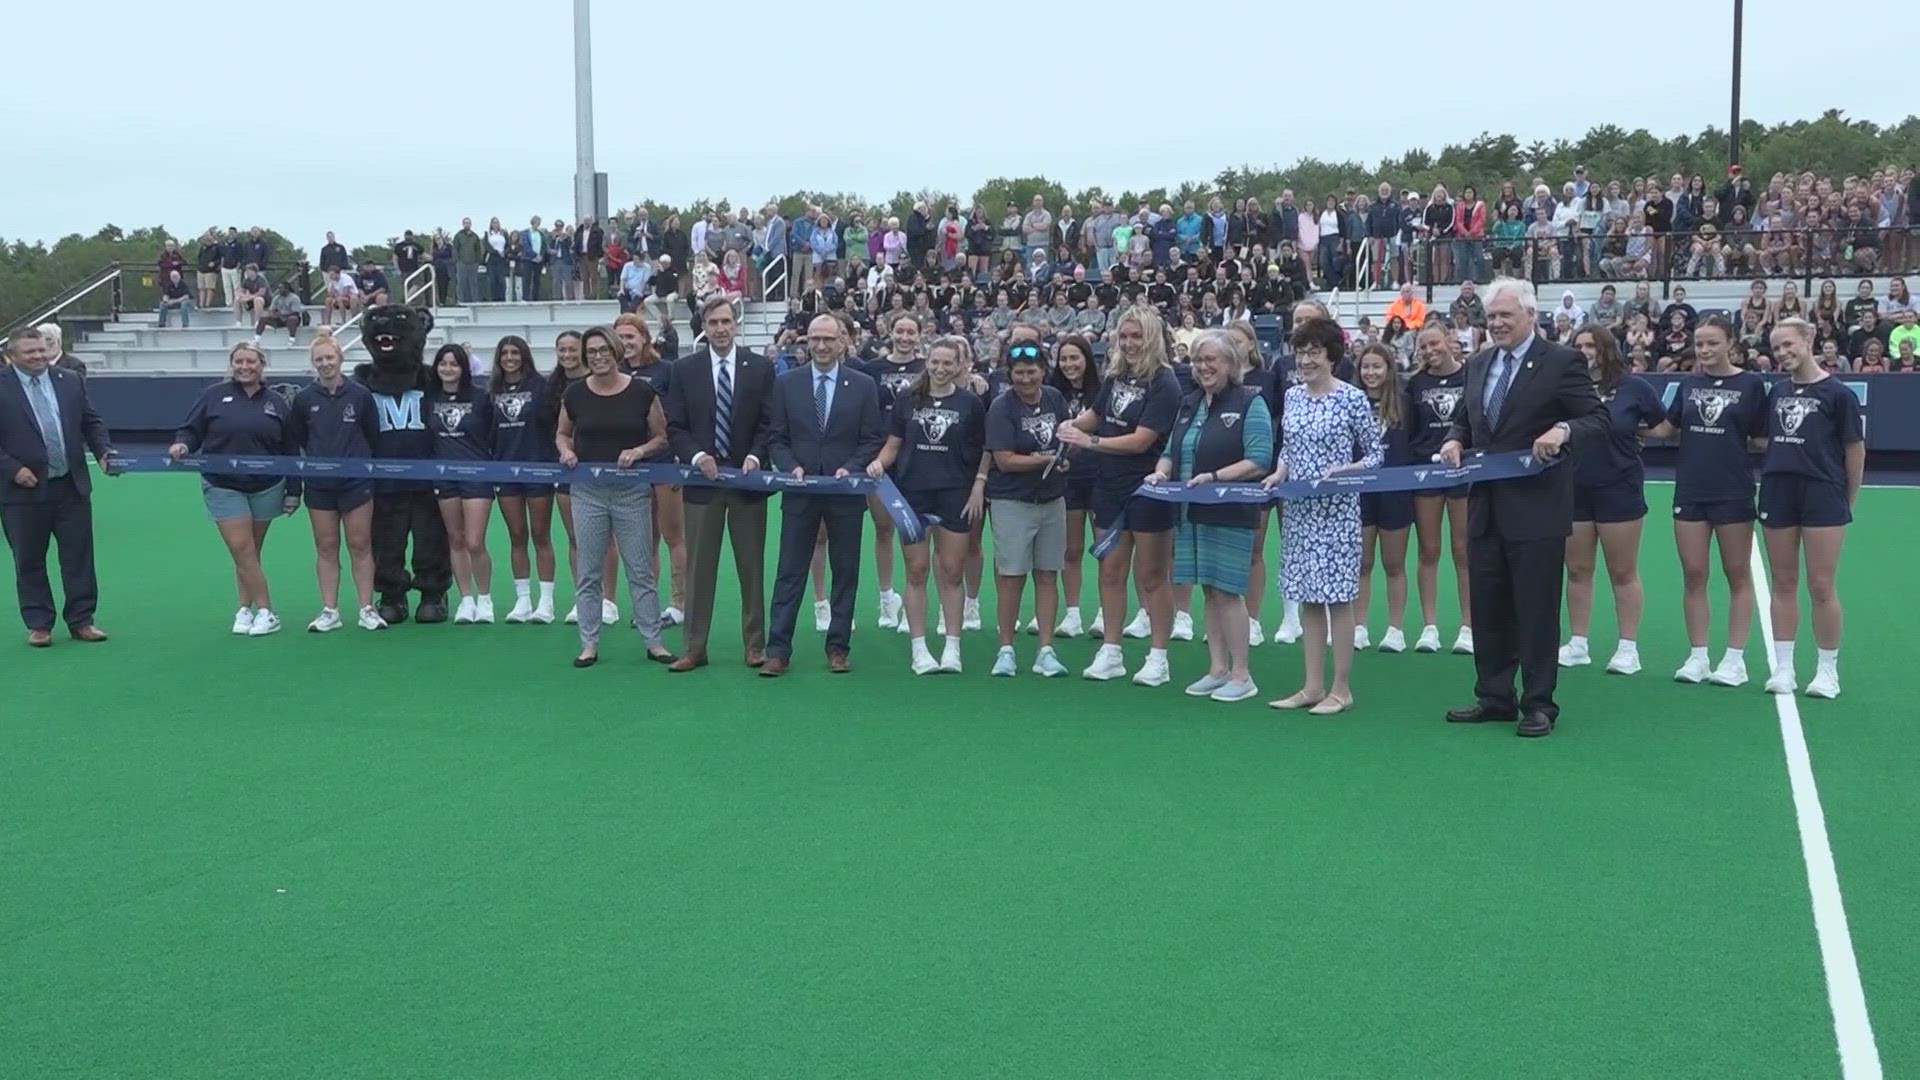 The new complex can seat up to 500 fans and has turf specifically designed for field hockey.